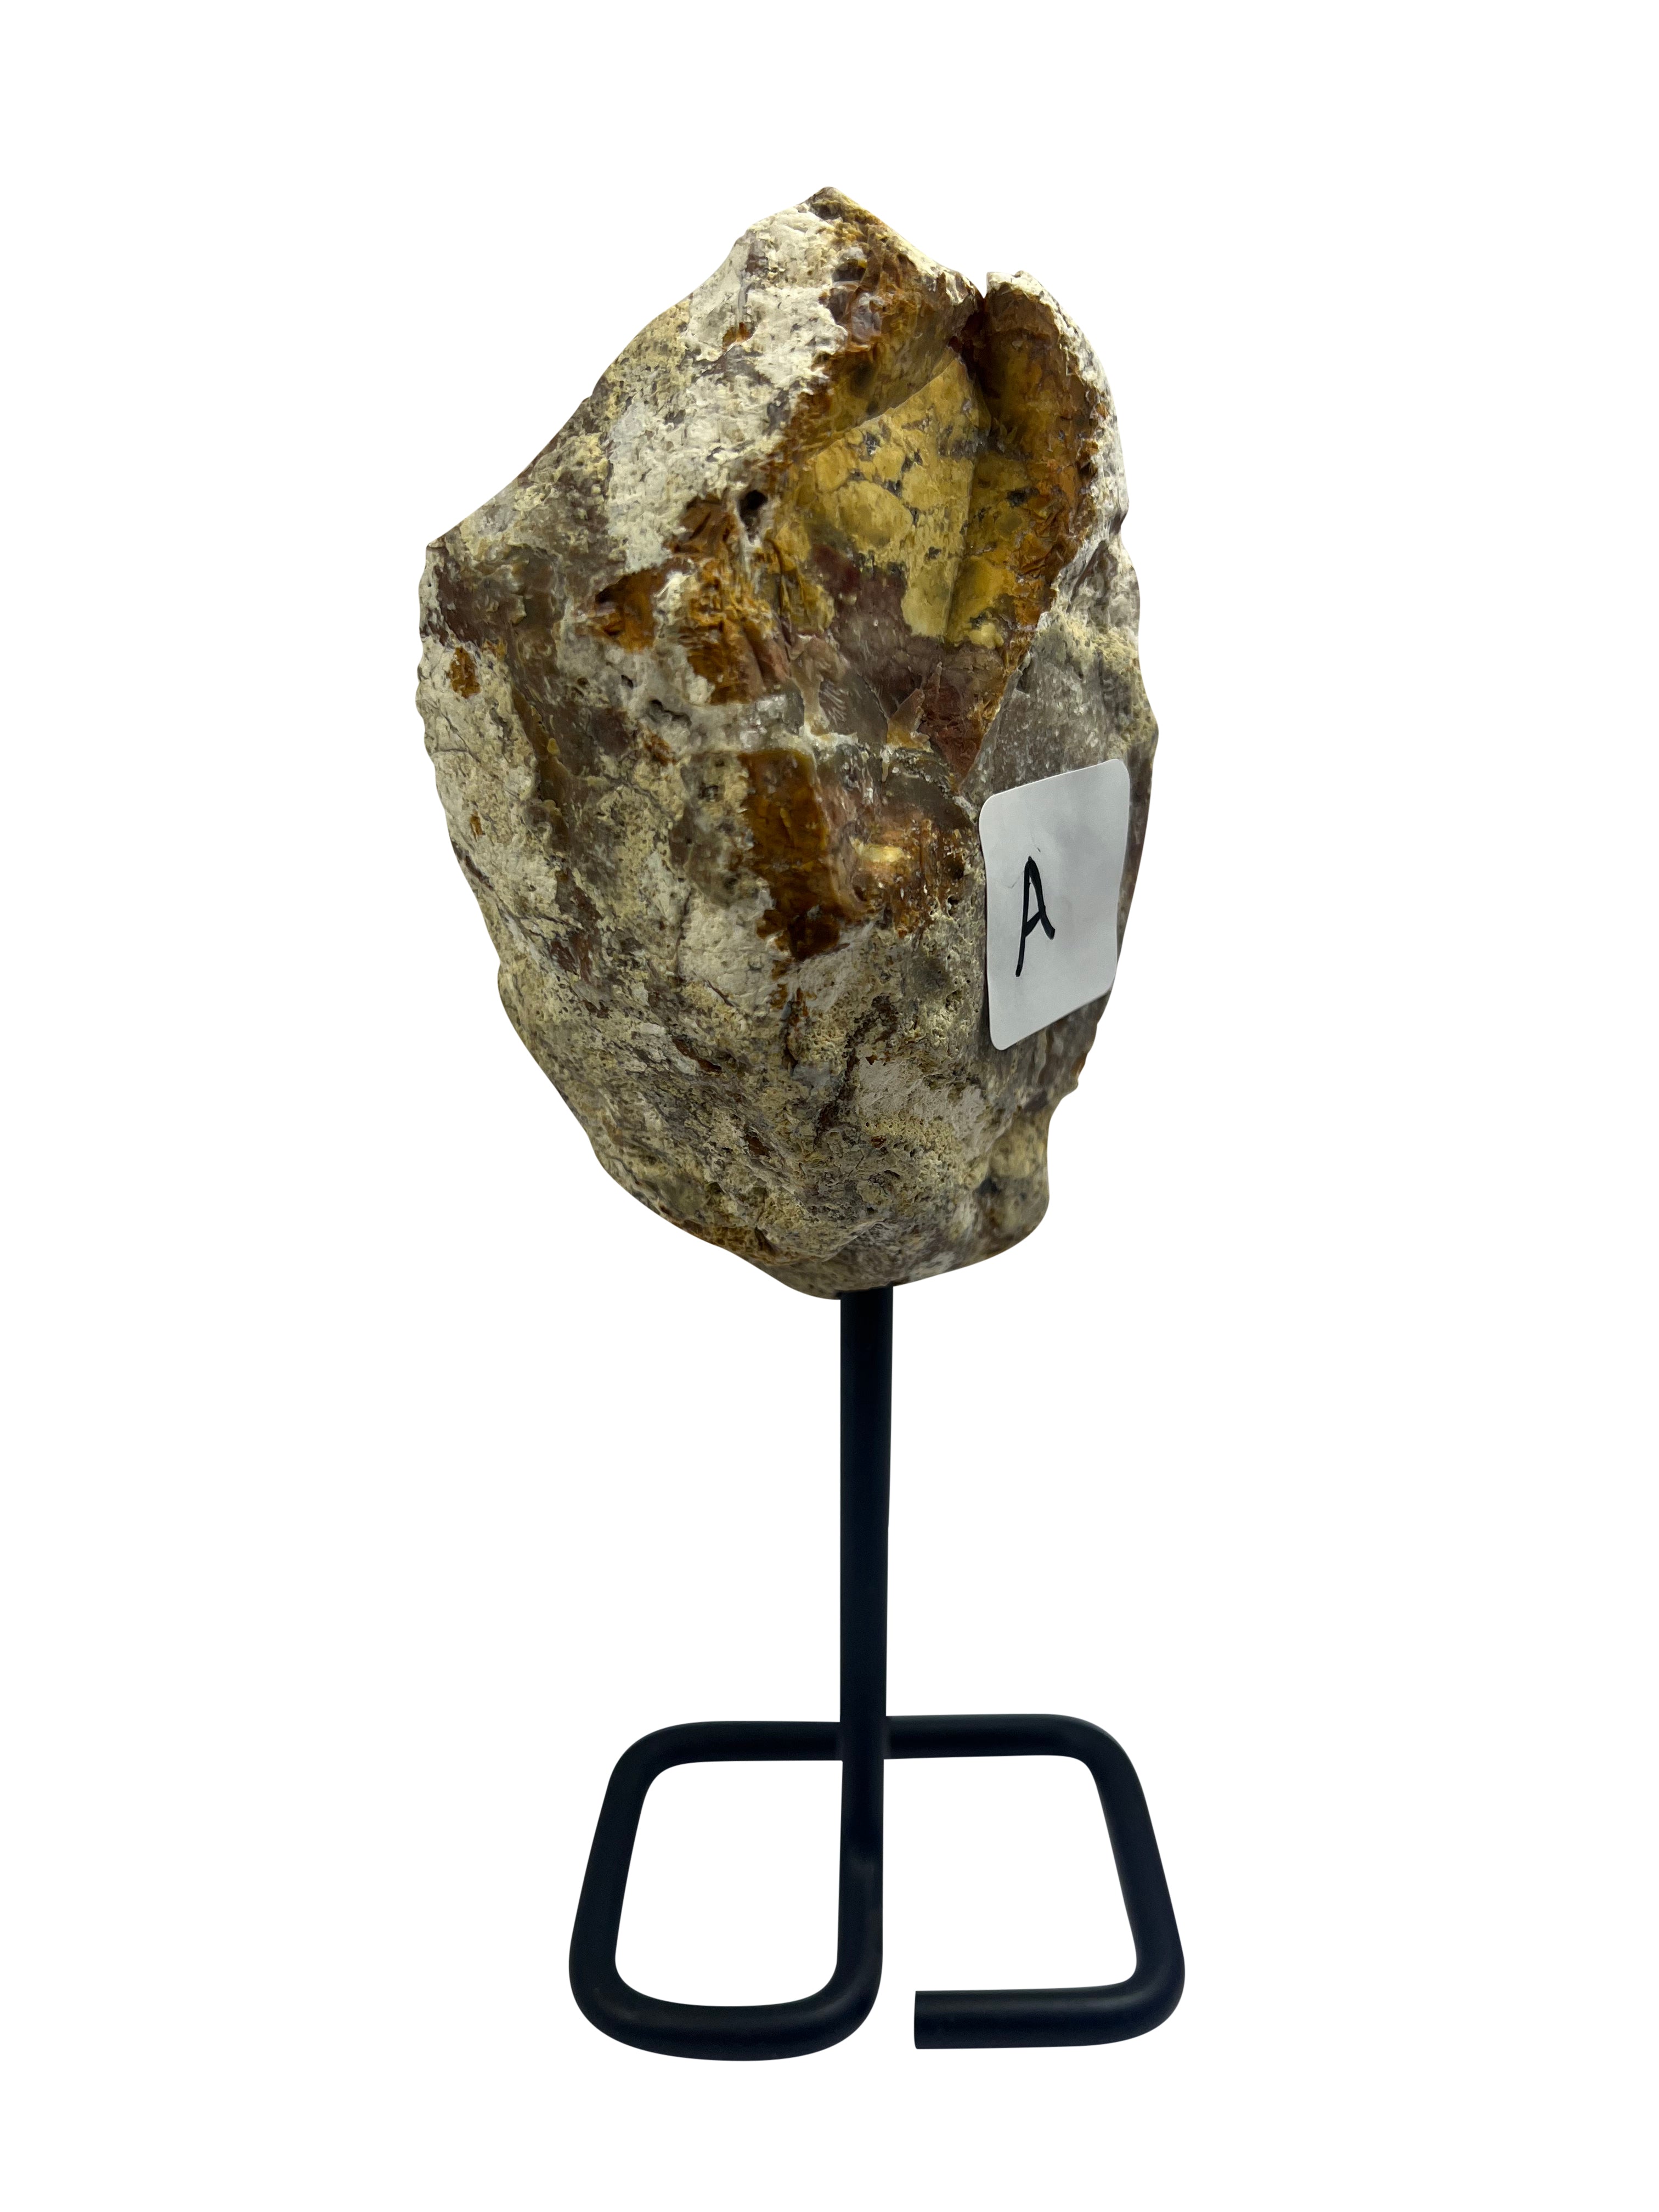 Unique Petrified Wood on Stand - Model A - Transformation Stone from Arizona USA